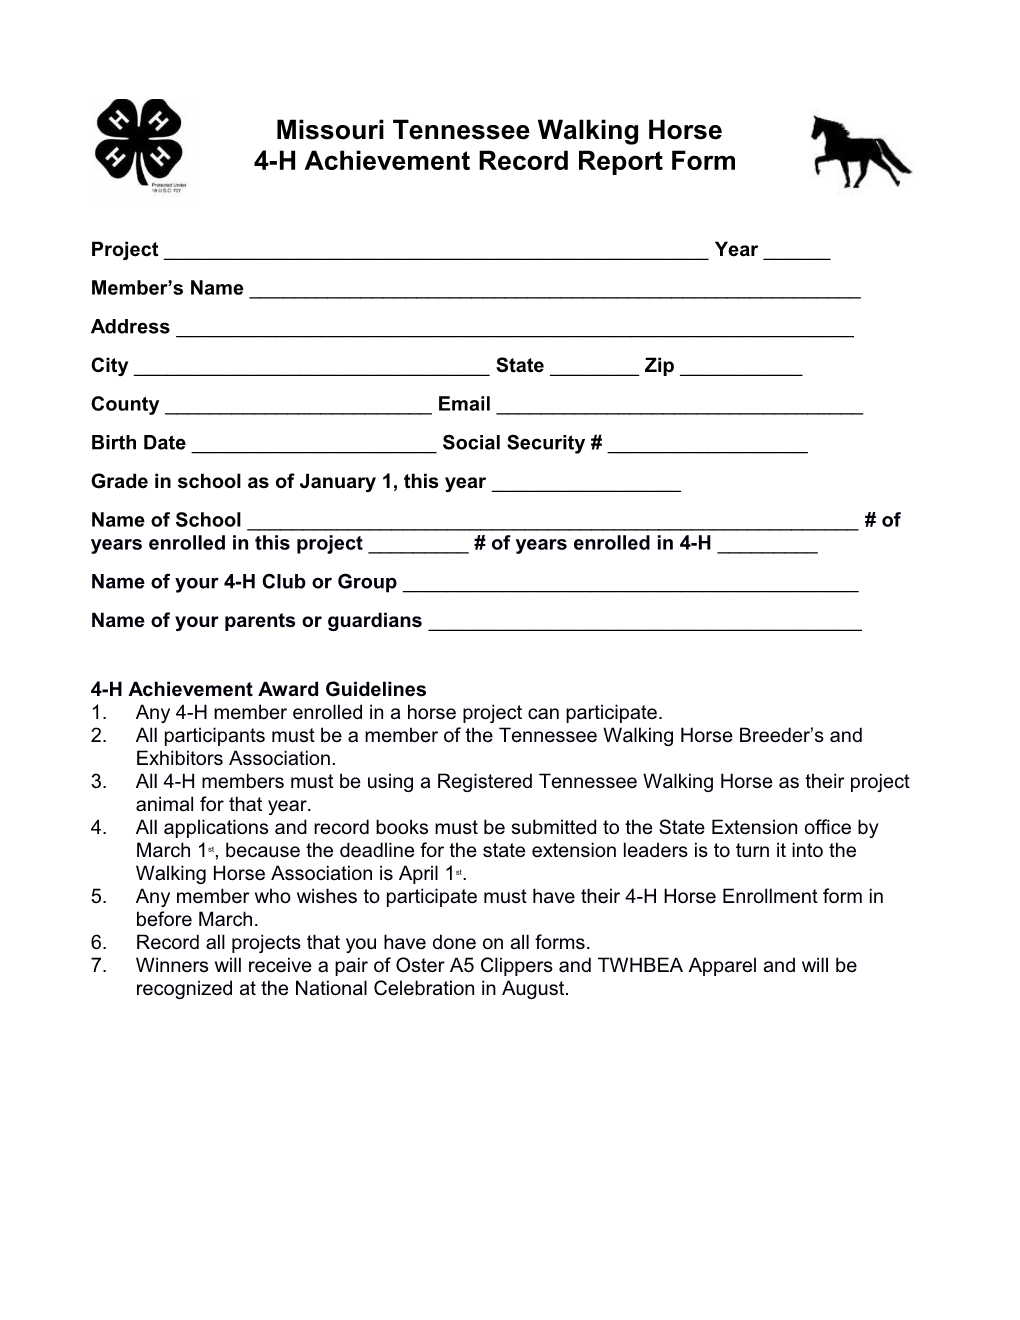 Missouritennessee Walking Horse 4-H Achievement Record Report Form